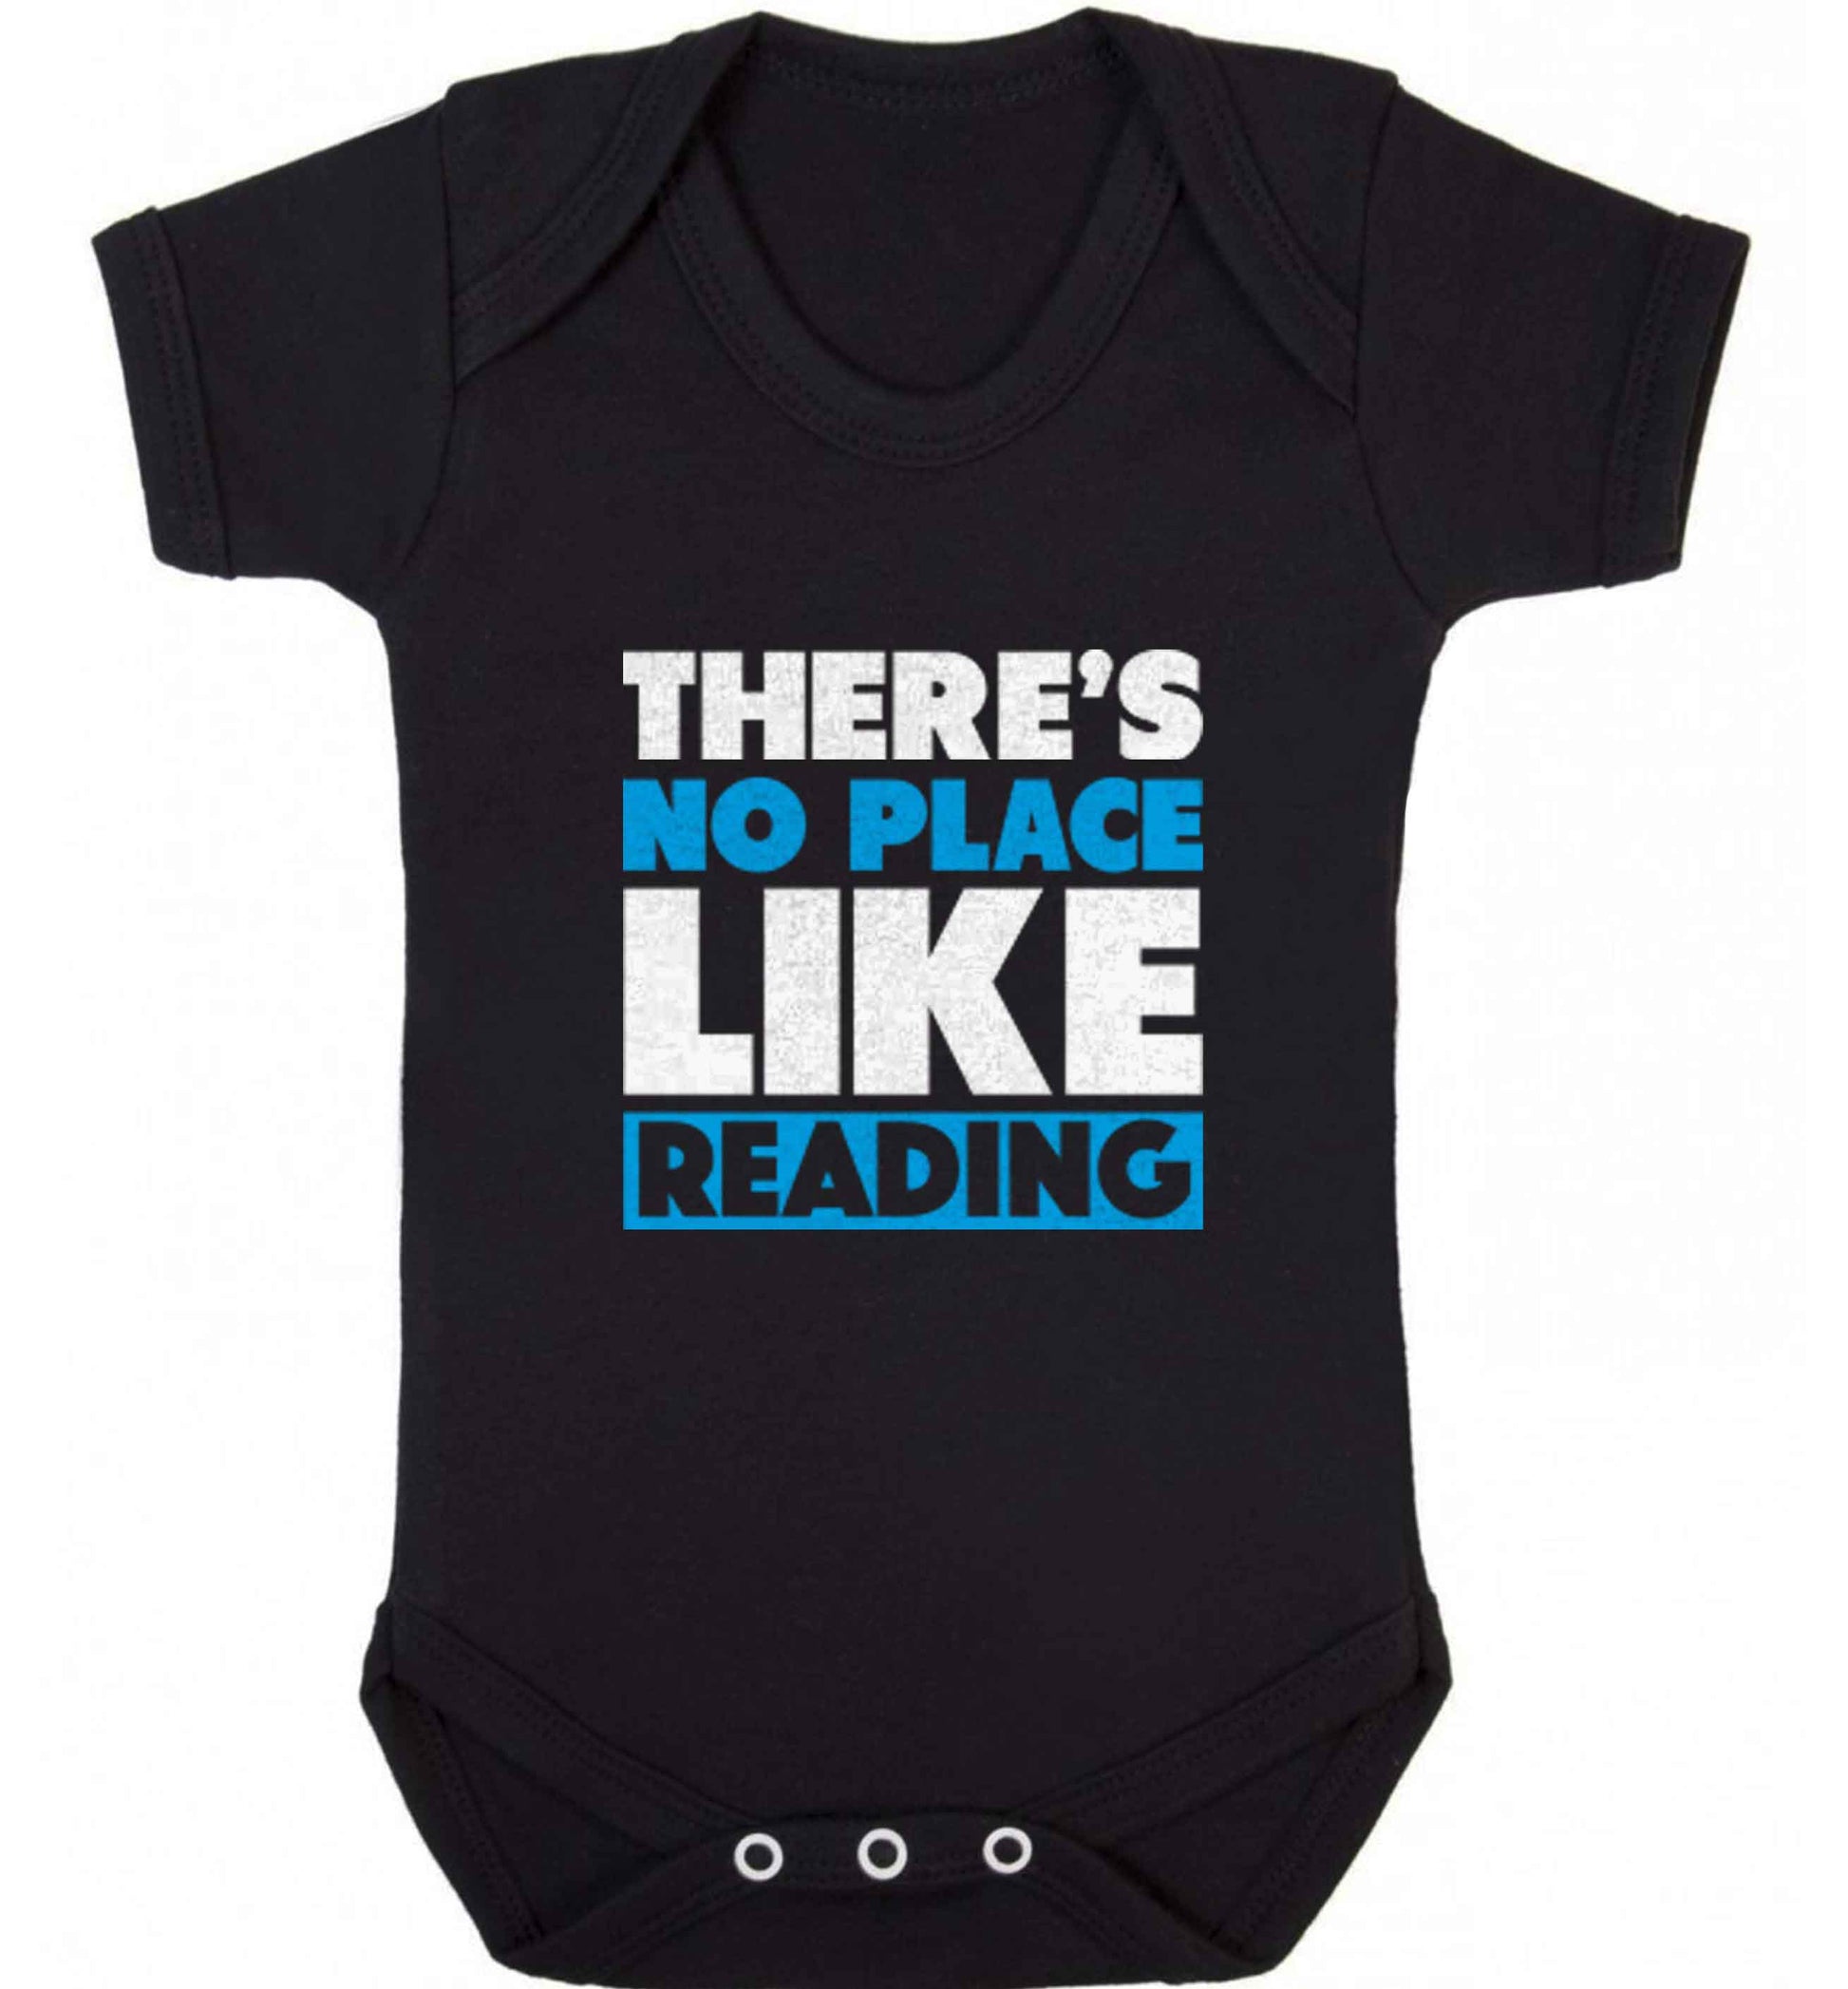 There's no place like Readingbaby vest black 18-24 months